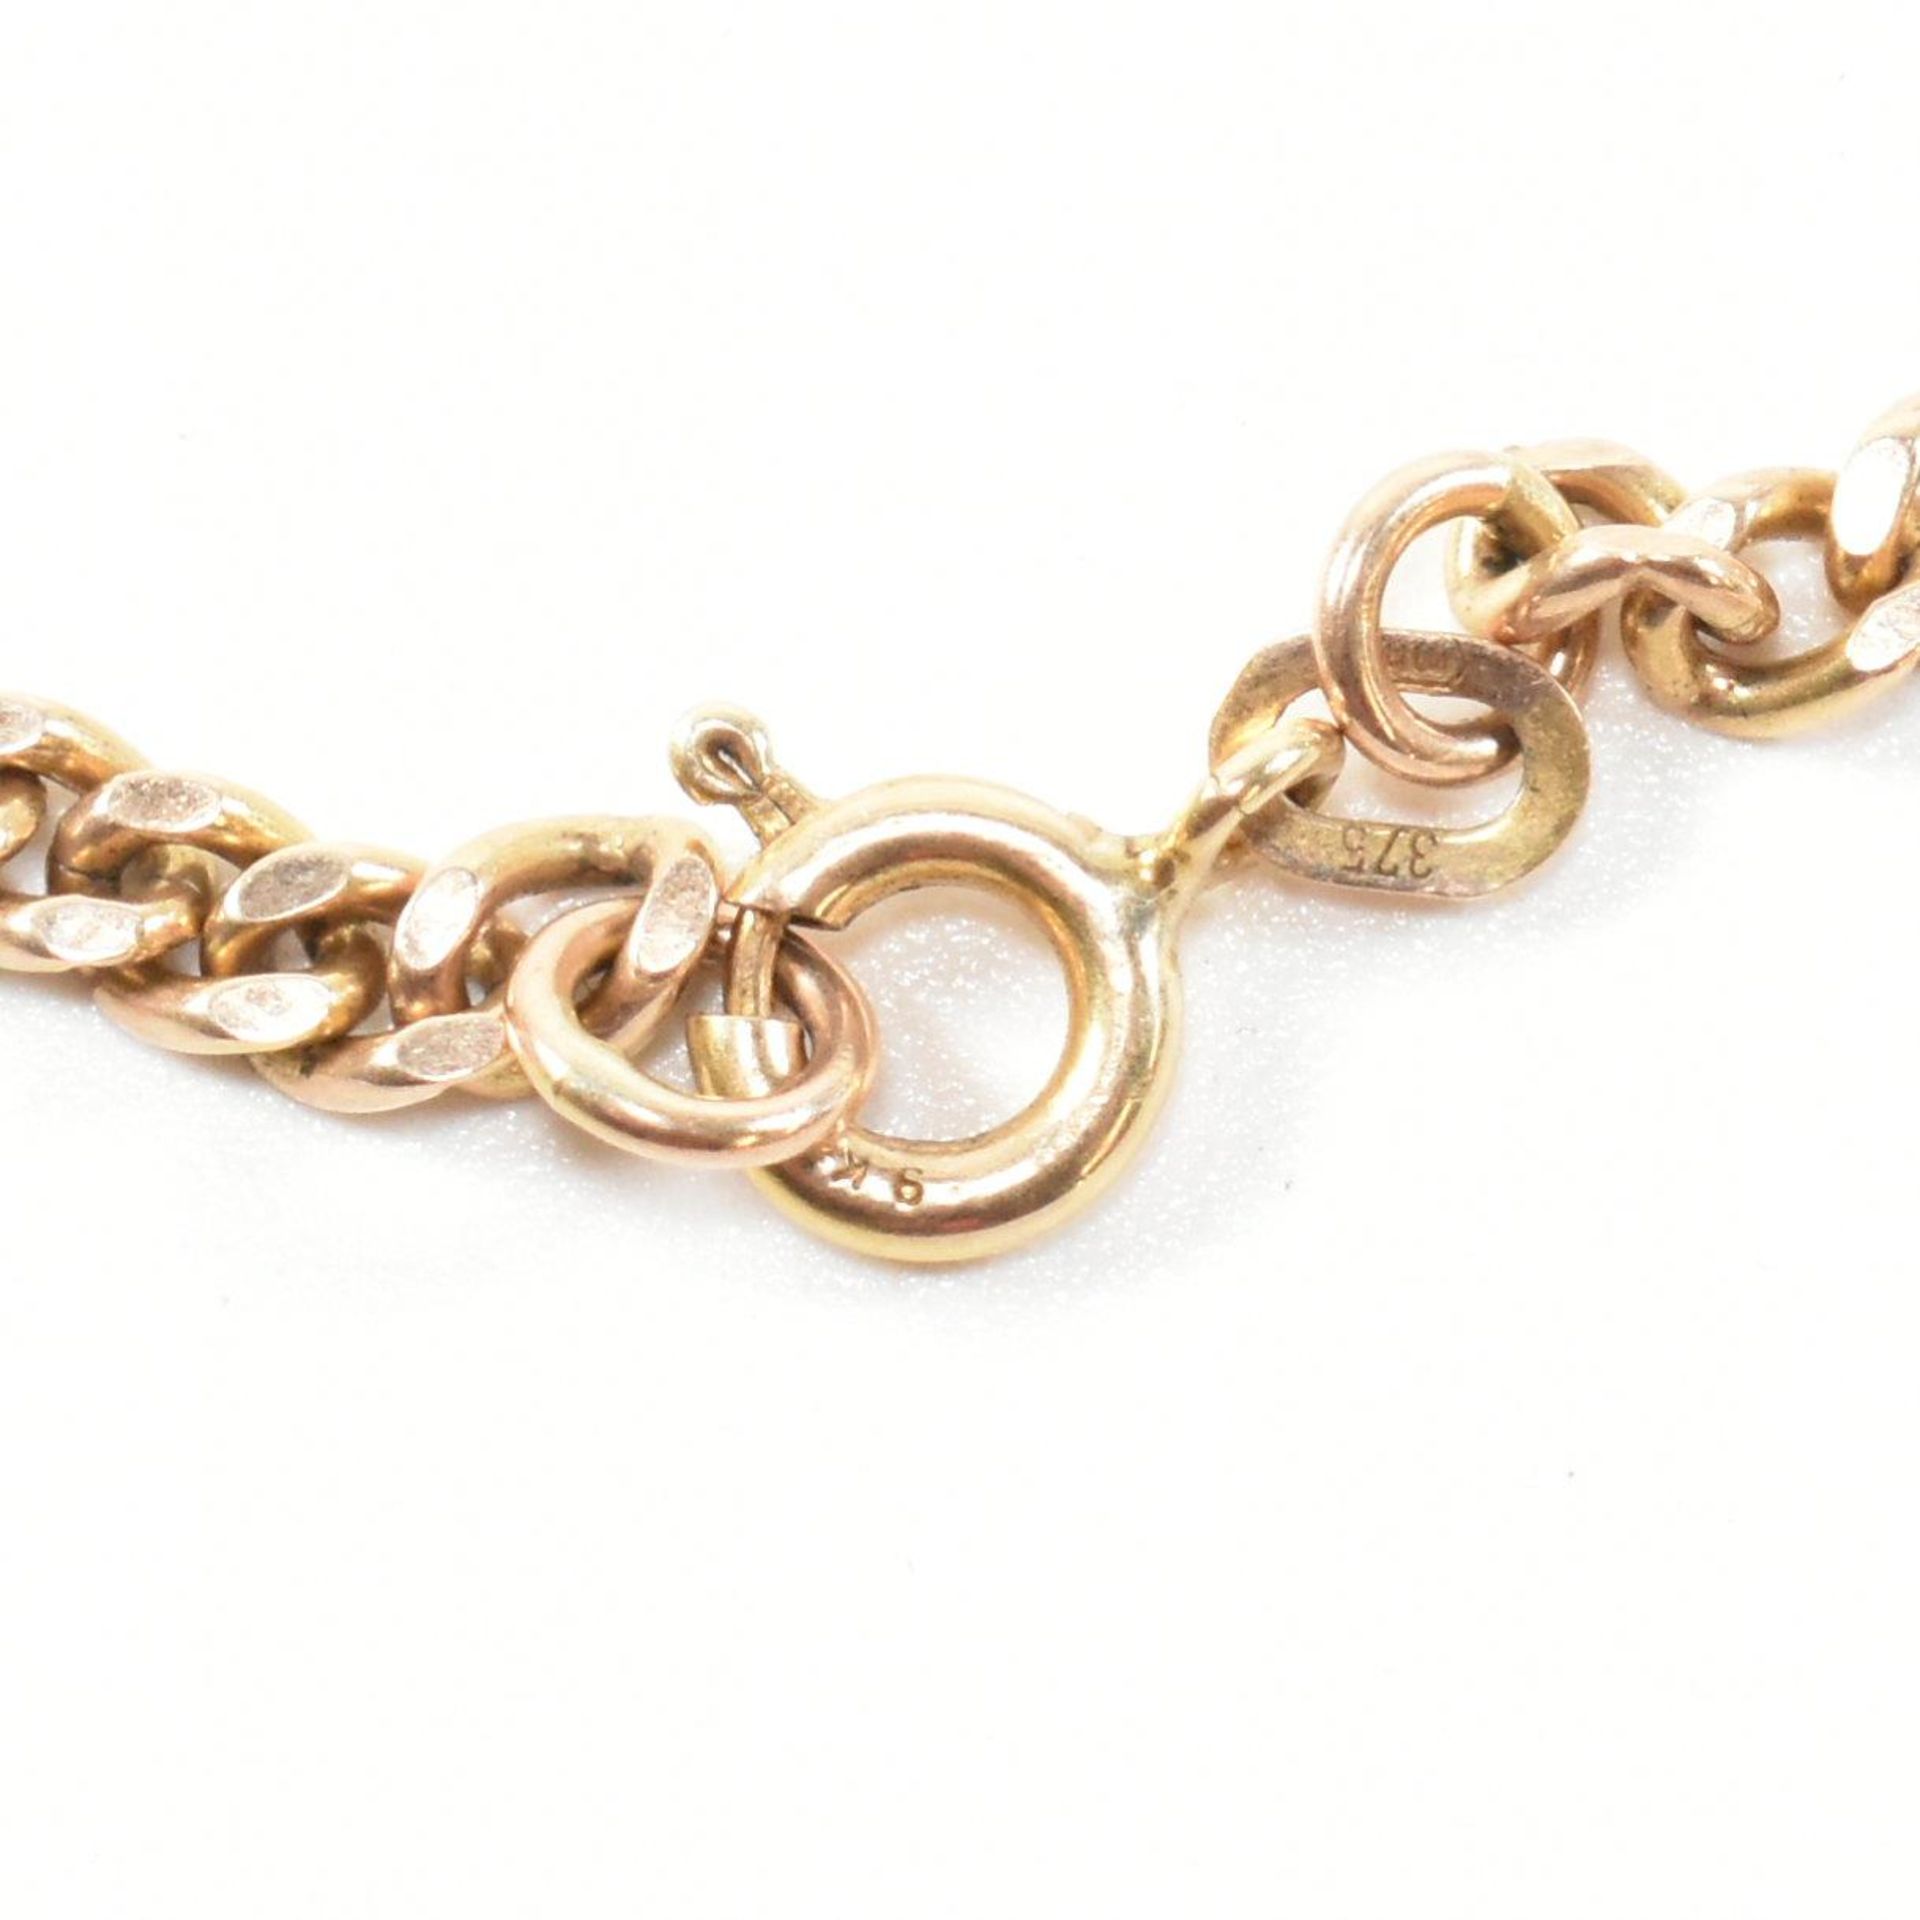 HALLMARKED 9CT GOLD CURB LINK CHAIN NECKLACE - Image 4 of 6